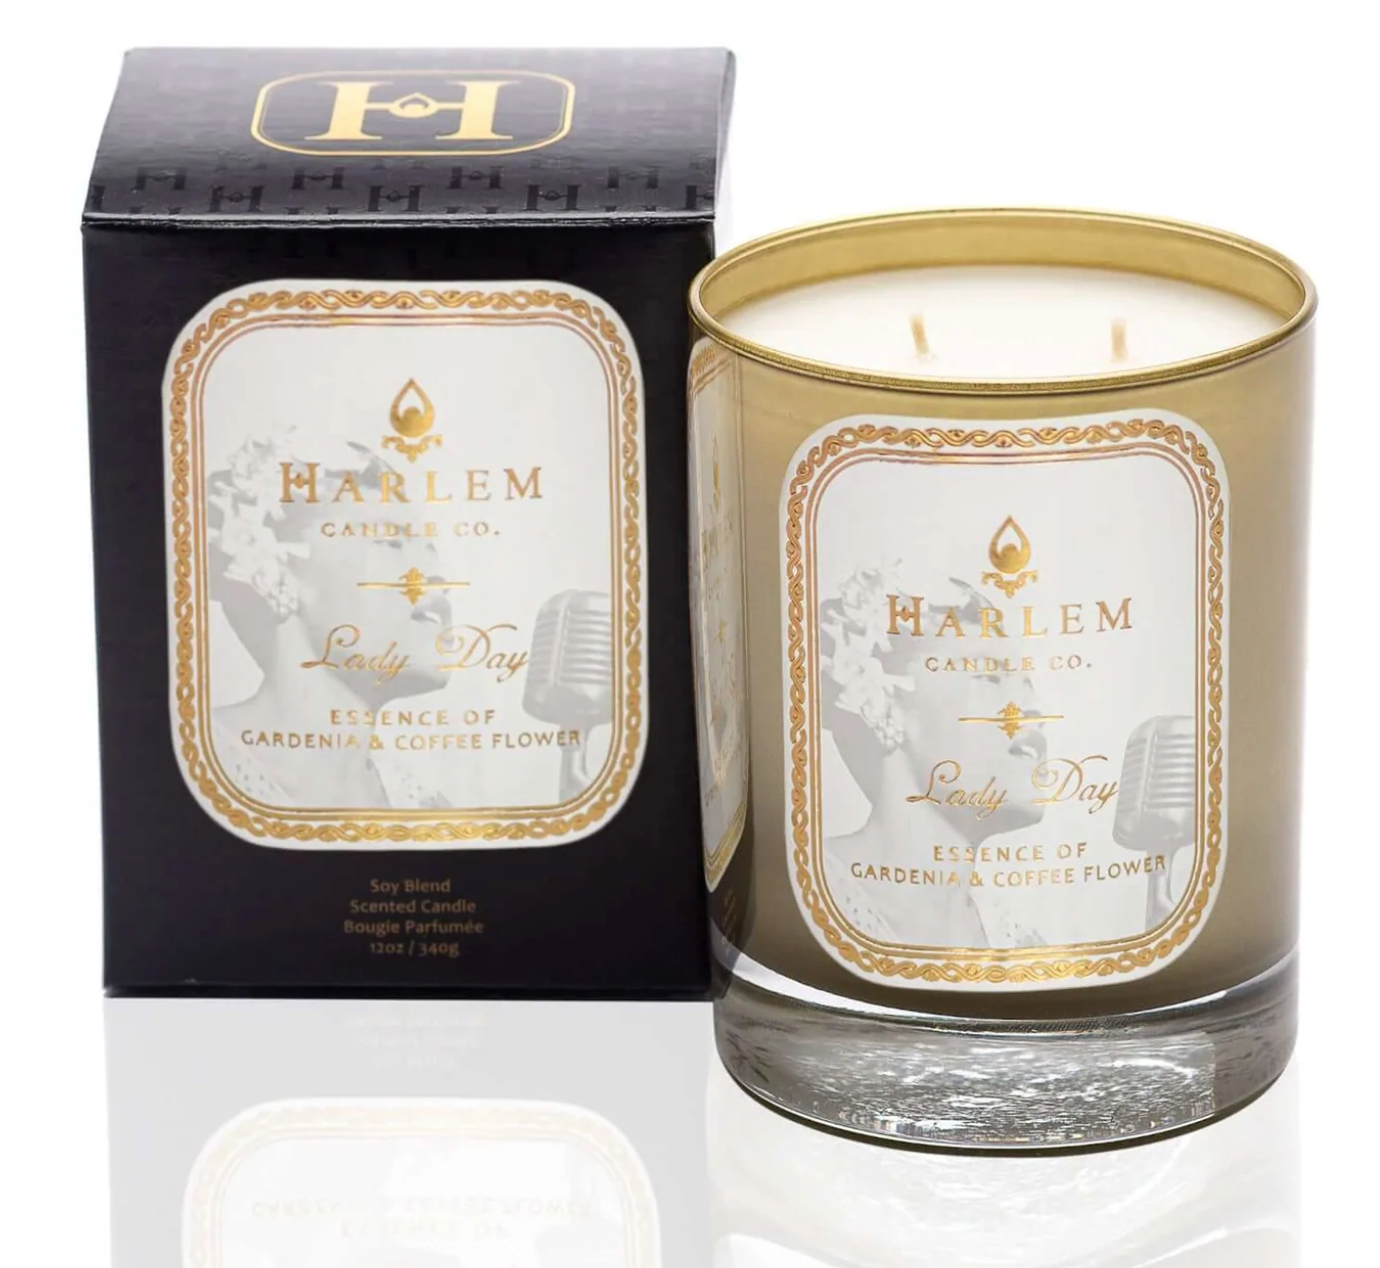 "Lady Day" Luxury Candle